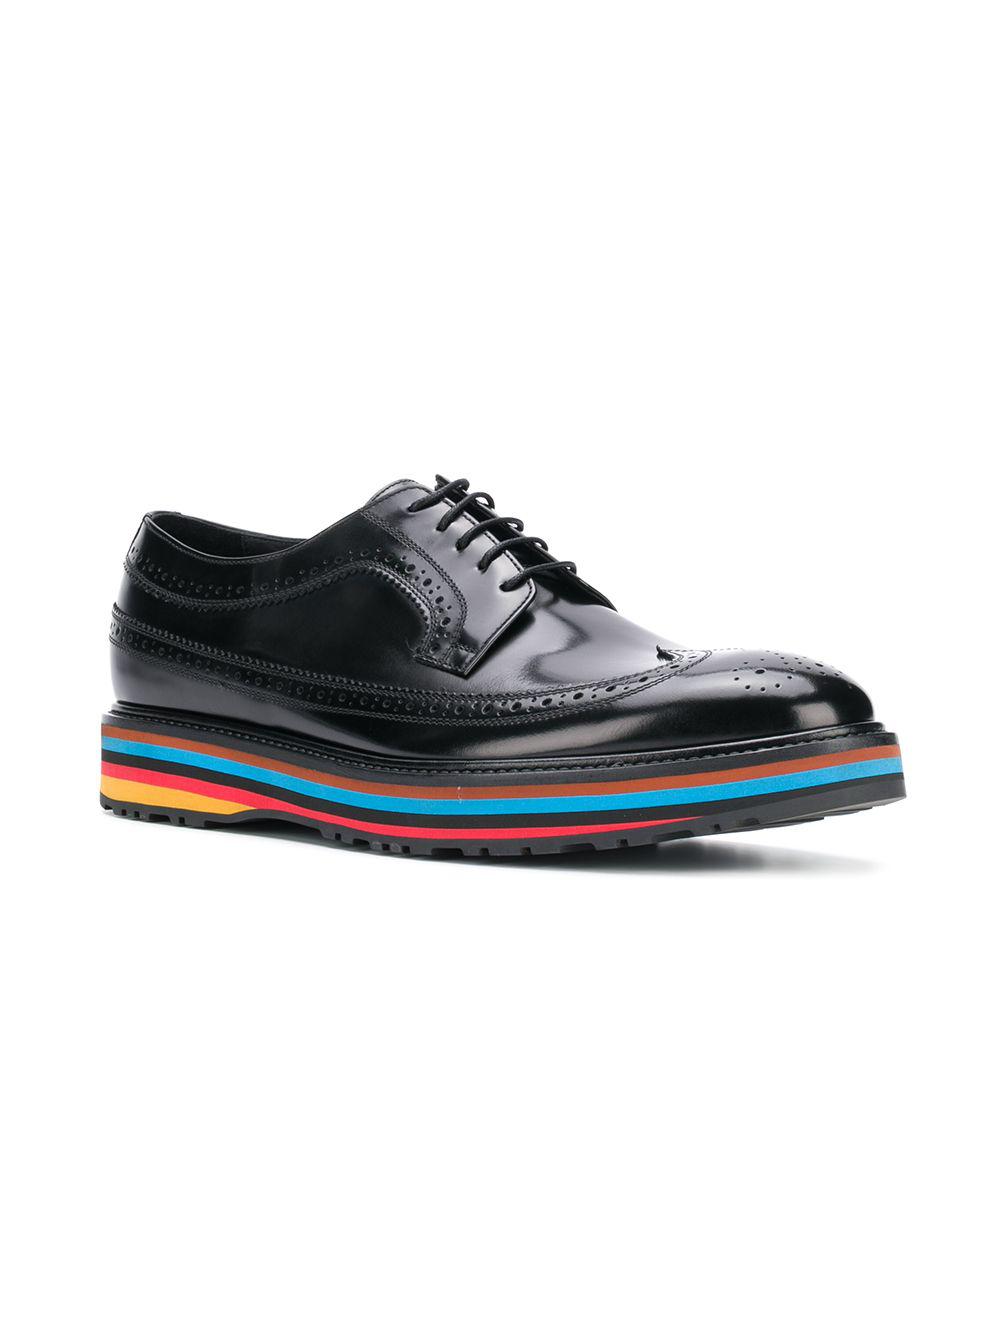 Paul Smith Leather Derby Shoes in Black for Men - Lyst